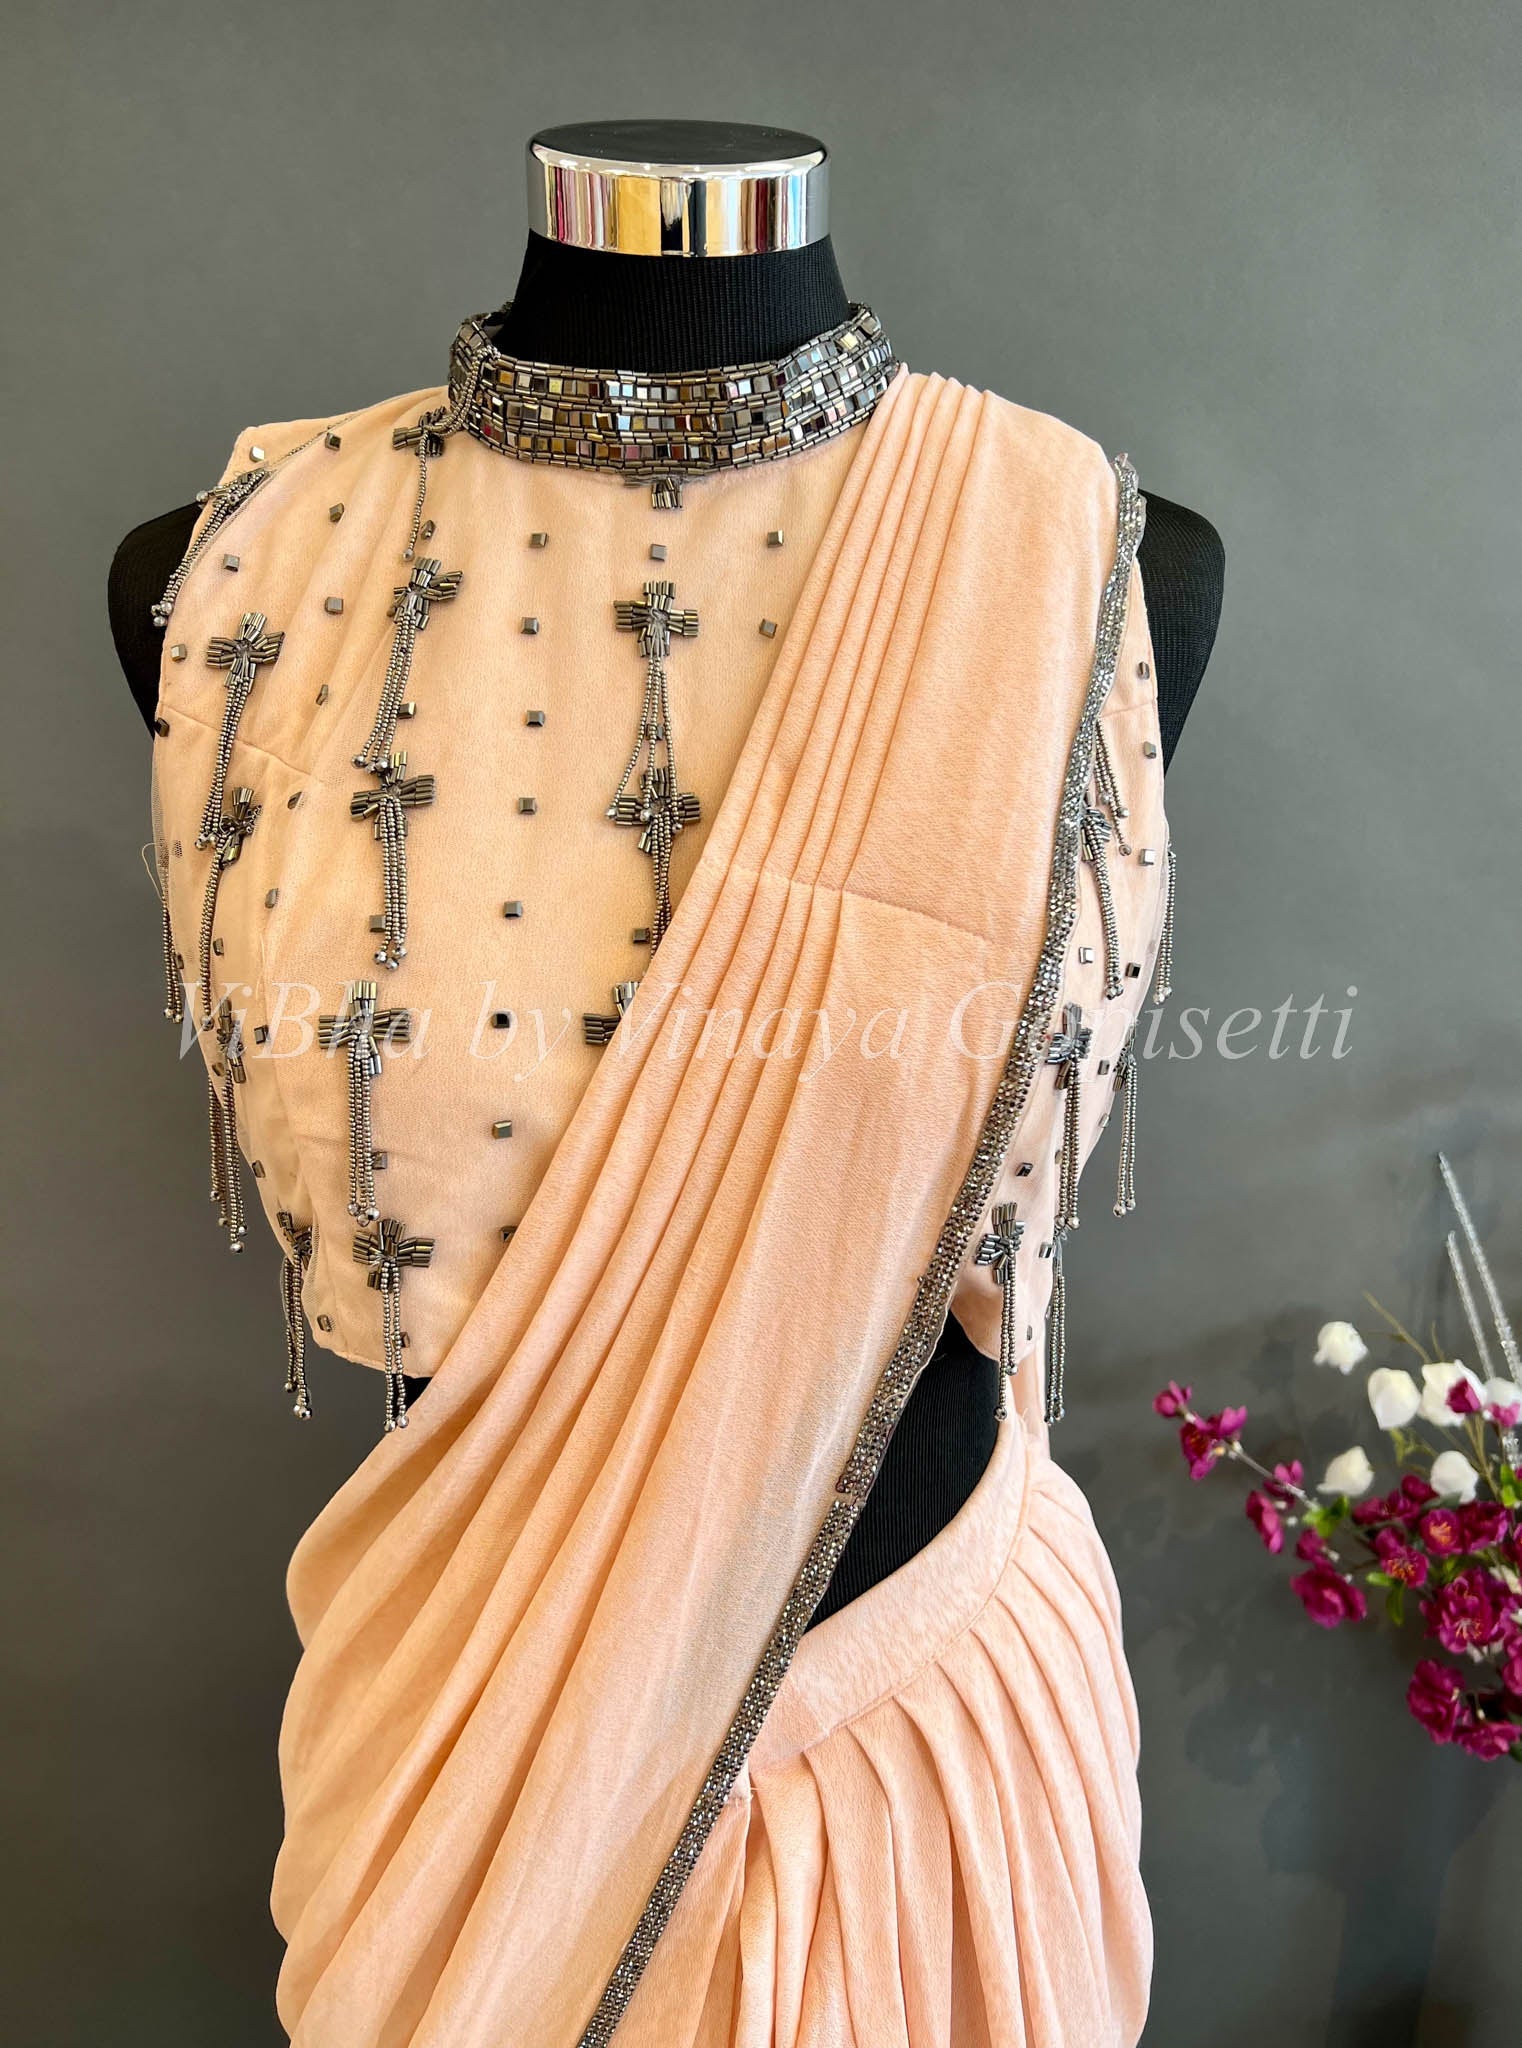 Bhamini Umapathy on Instagram: “From not knowing how to roughly fold a saree  to these perfectly fold ready-to-dr… | Draping fashion, Fashion sewing  tutorials, Saree